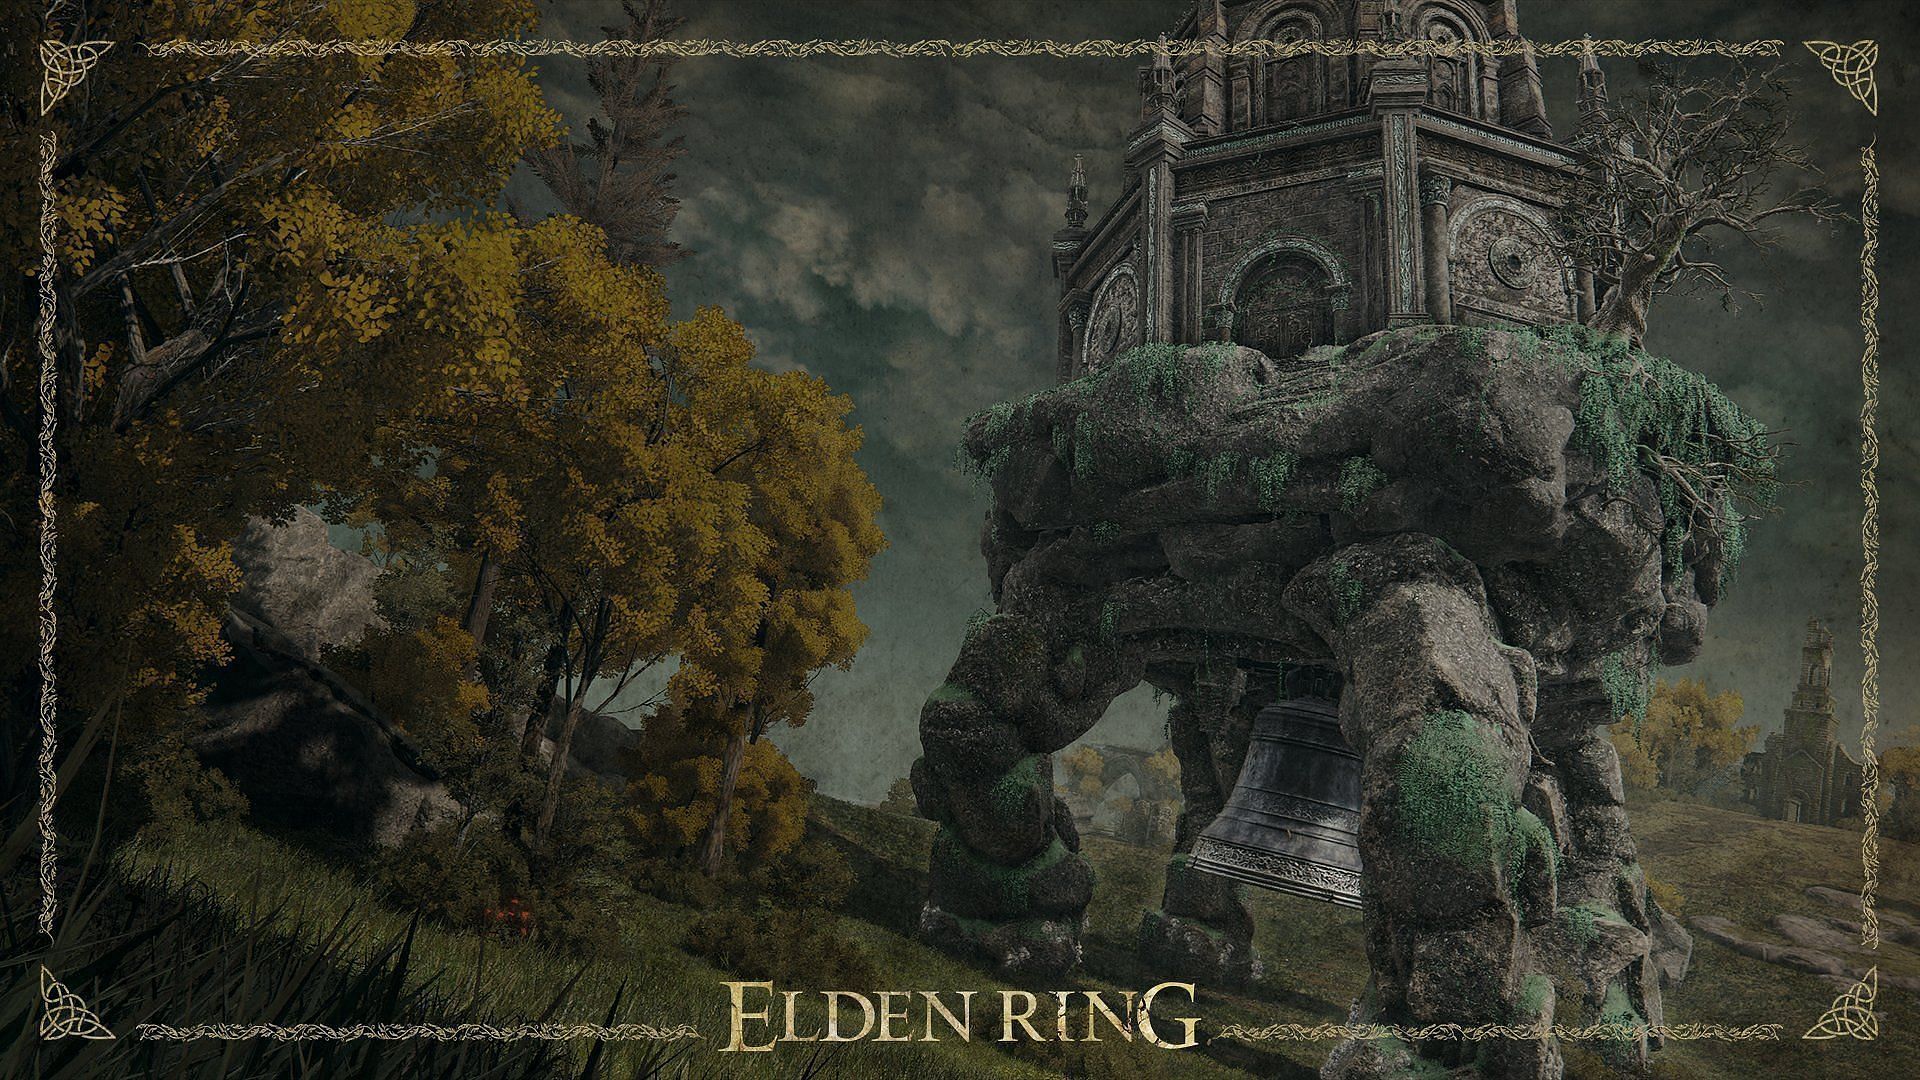 Players can find art paintings in many different locations during their travels in Elden Ring, and they can point them on many fun scavenger hunt type puzzles (Image via Elden Ring/Twitter)